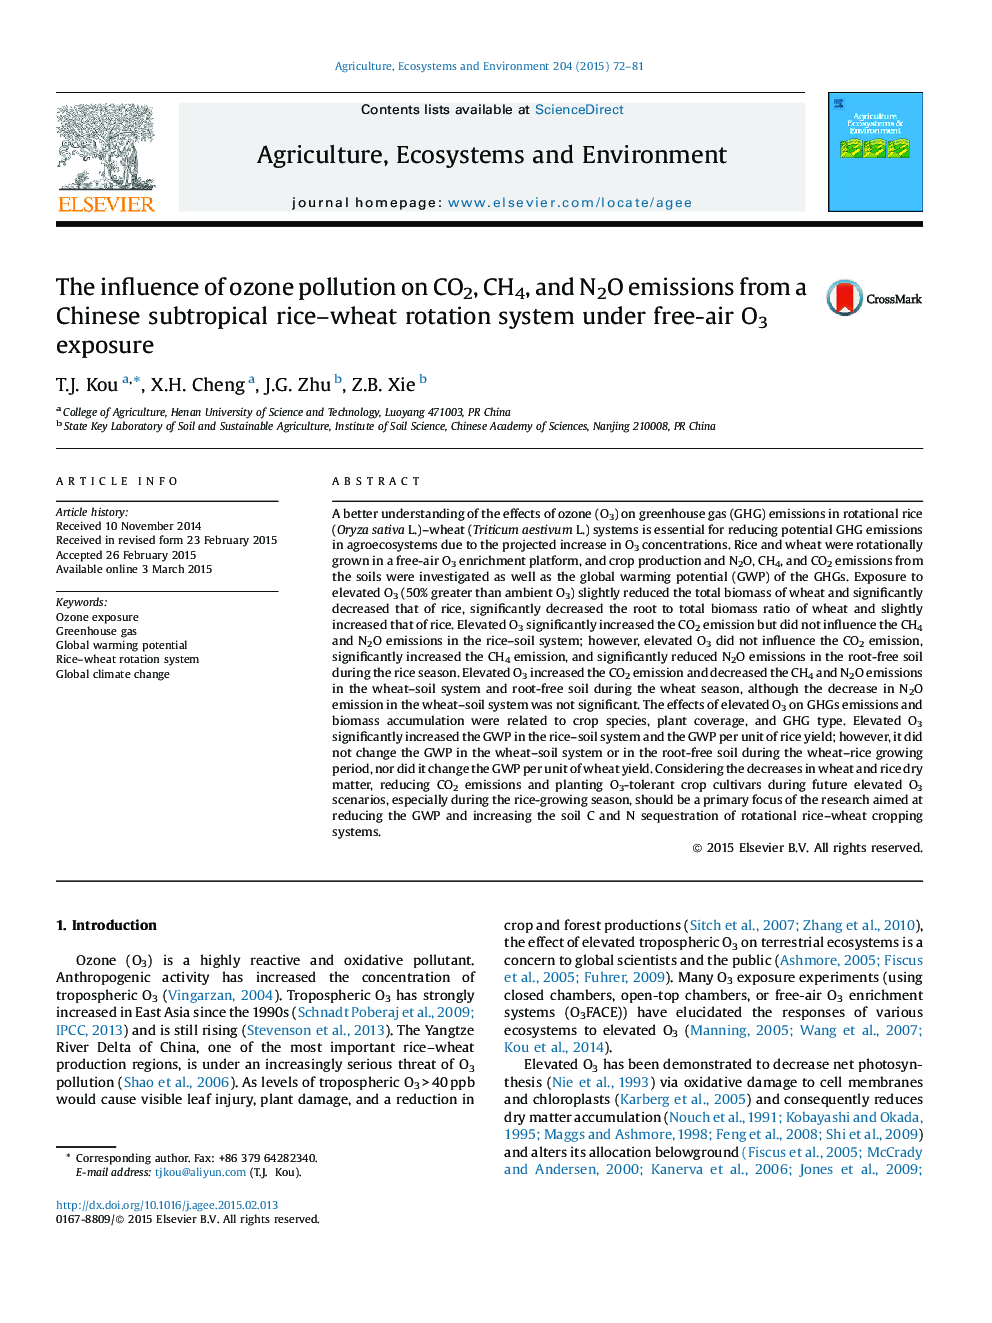 The influence of ozone pollution on CO2, CH4, and N2O emissions from a Chinese subtropical rice–wheat rotation system under free-air O3 exposure